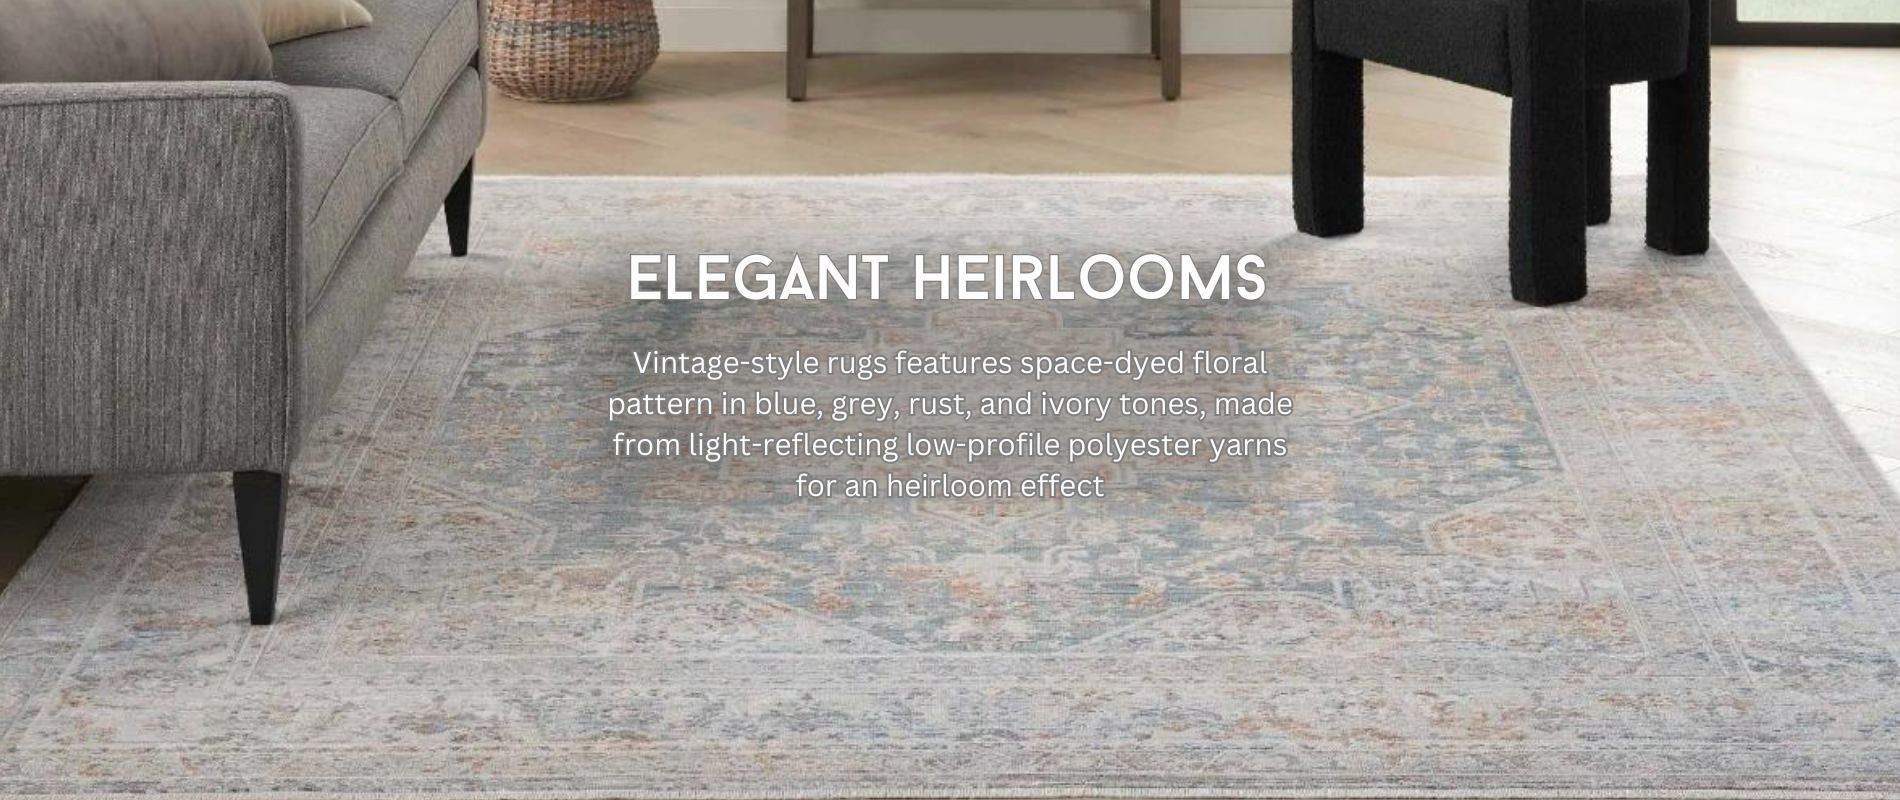 Elegant Heirlooms Collection by Nourison